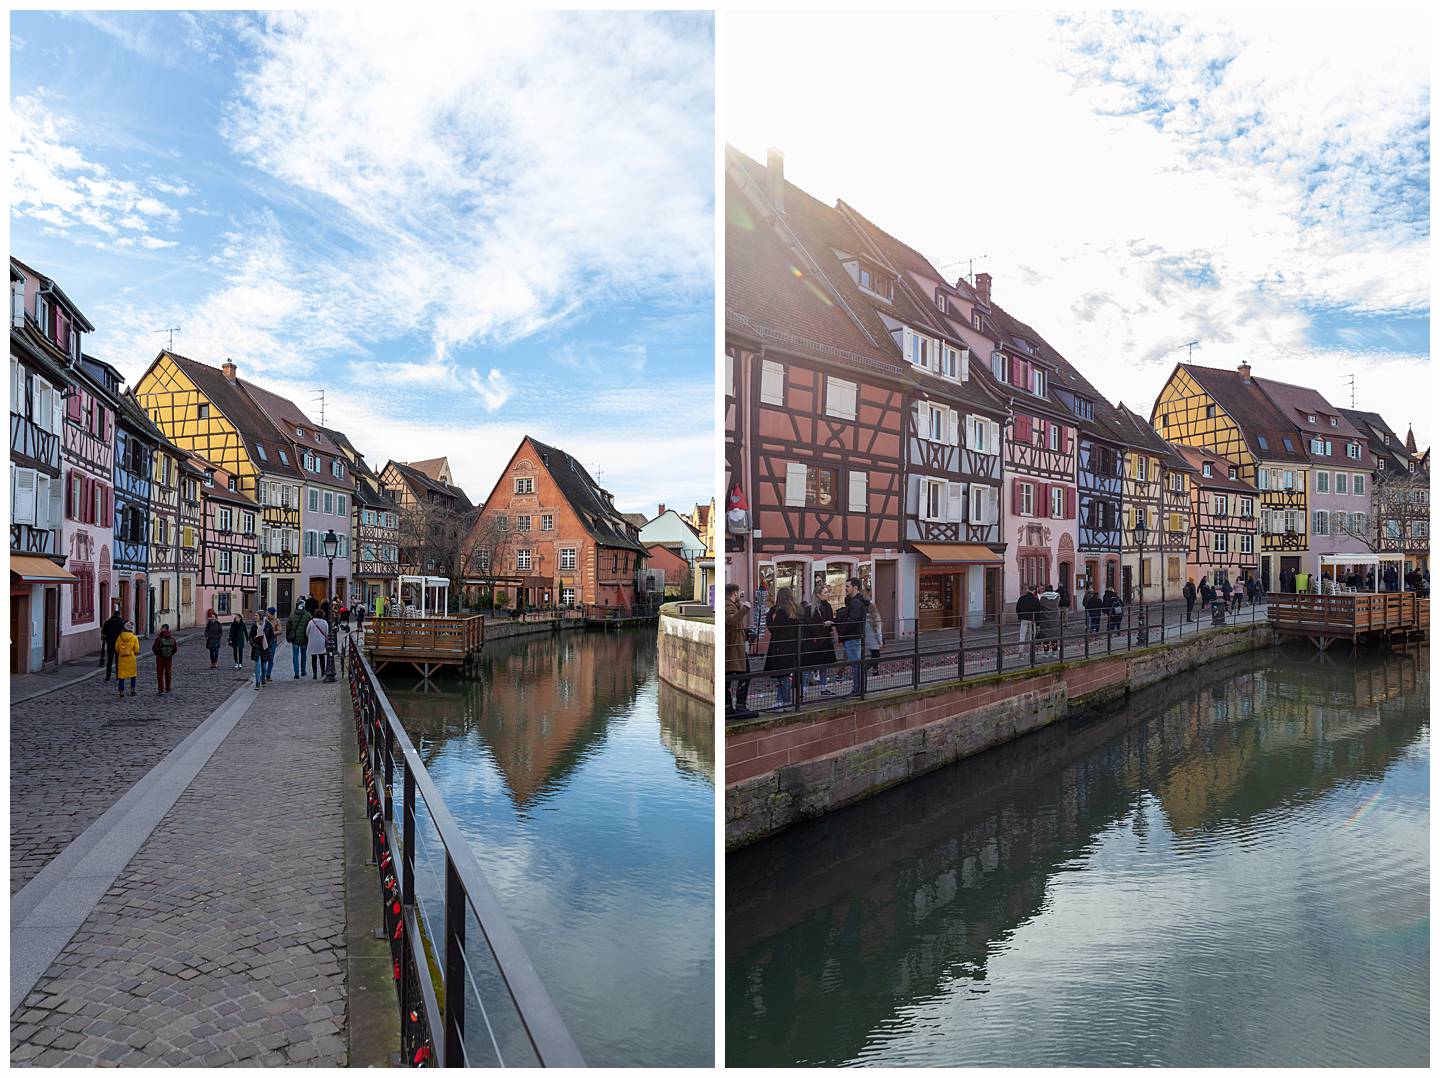 journey of doing - Alsace Wine route - Colmar, France